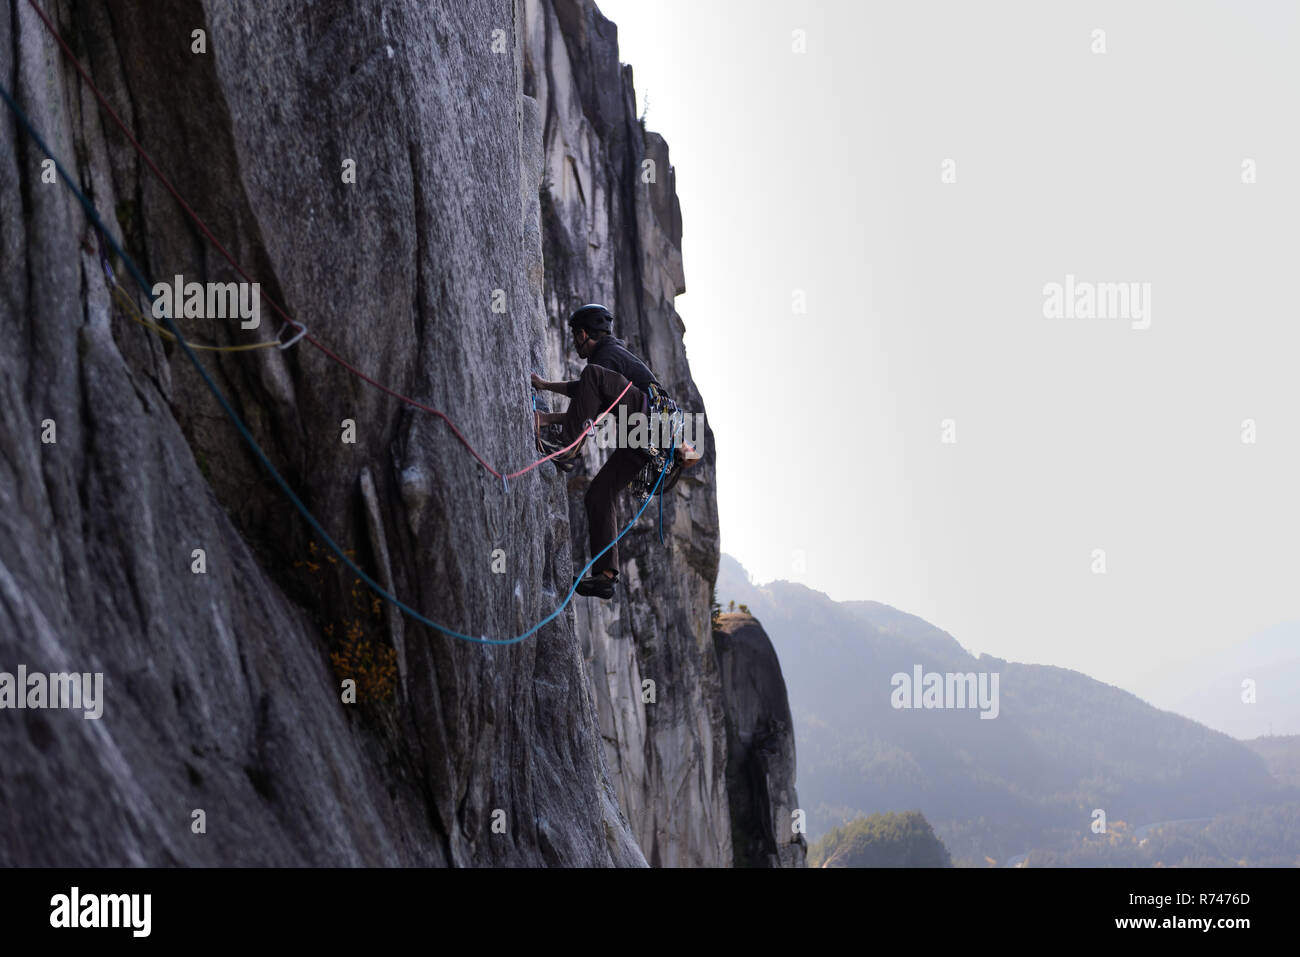 Young male rock climber climbing rock face, elevated view, le Chef, Squamish, British Columbia, Canada Banque D'Images